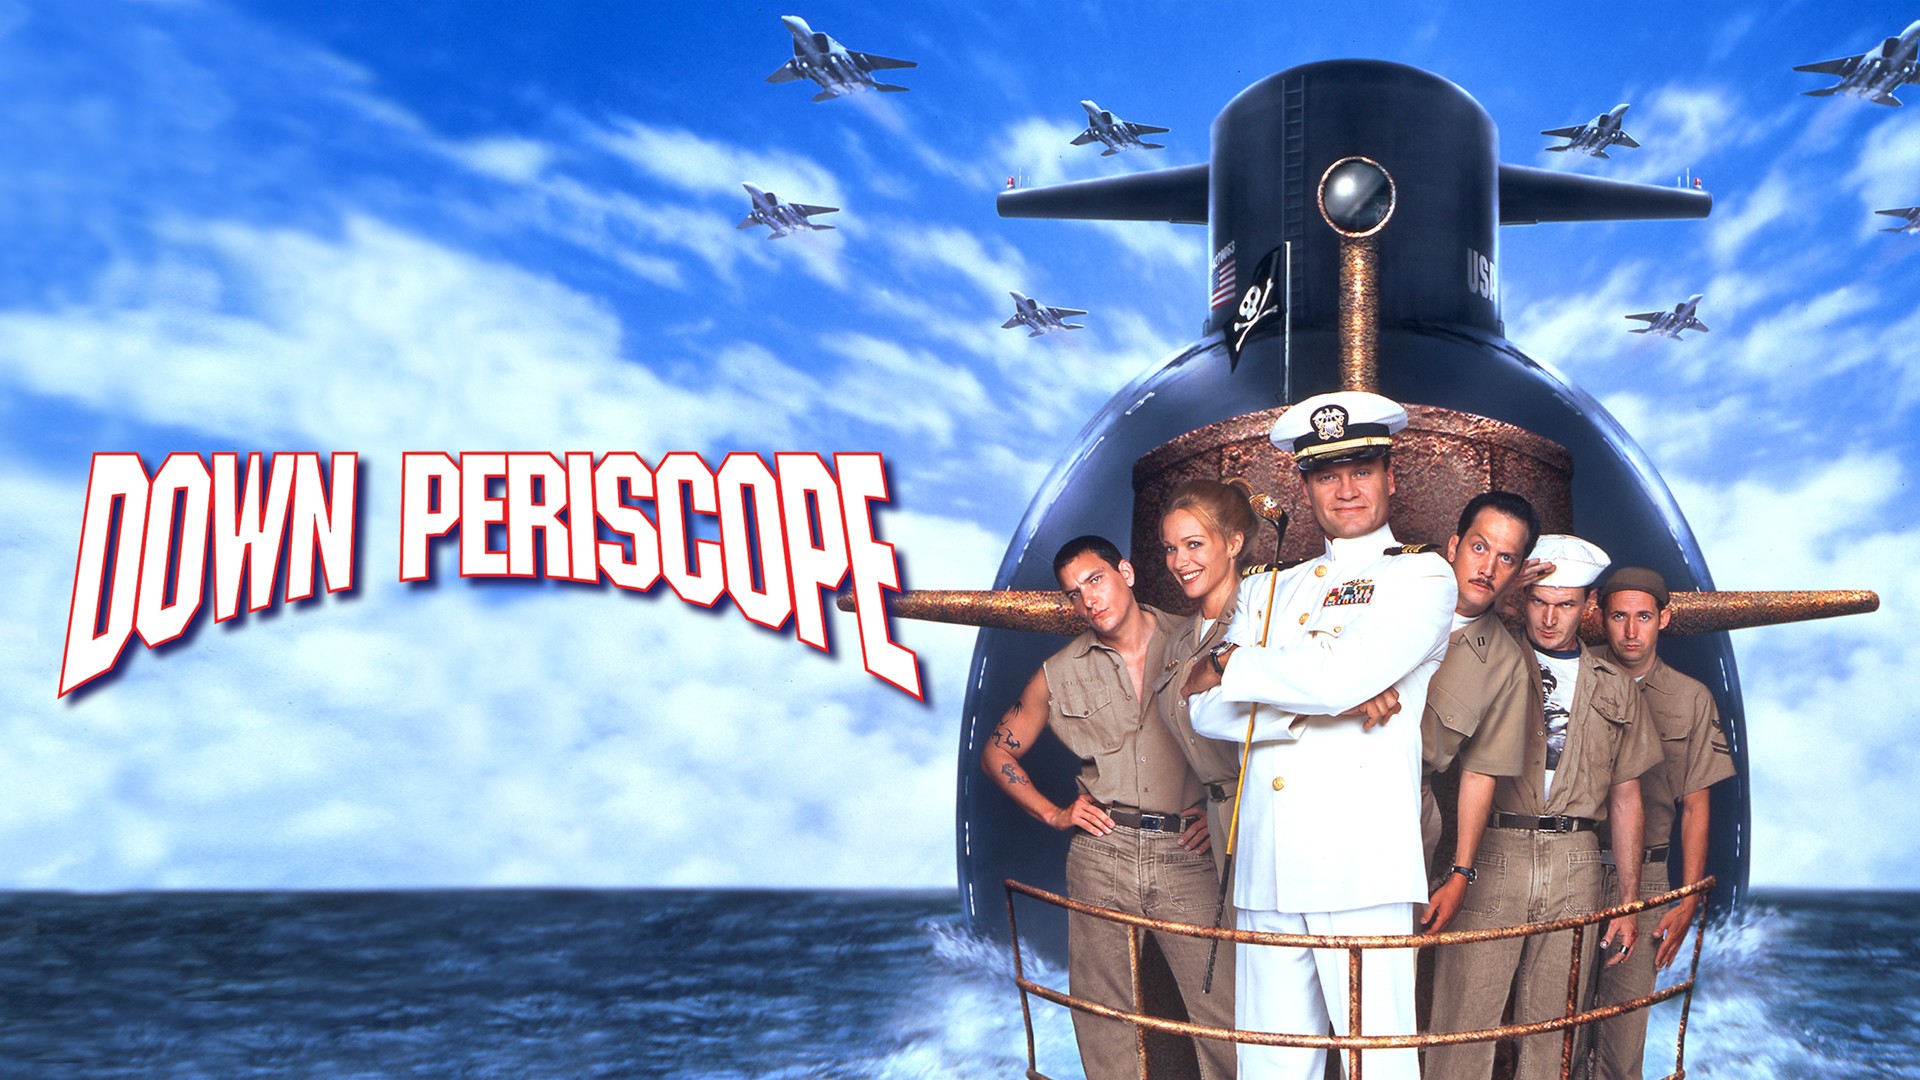 Down Periscope (1996) - Test Dive - YouTube